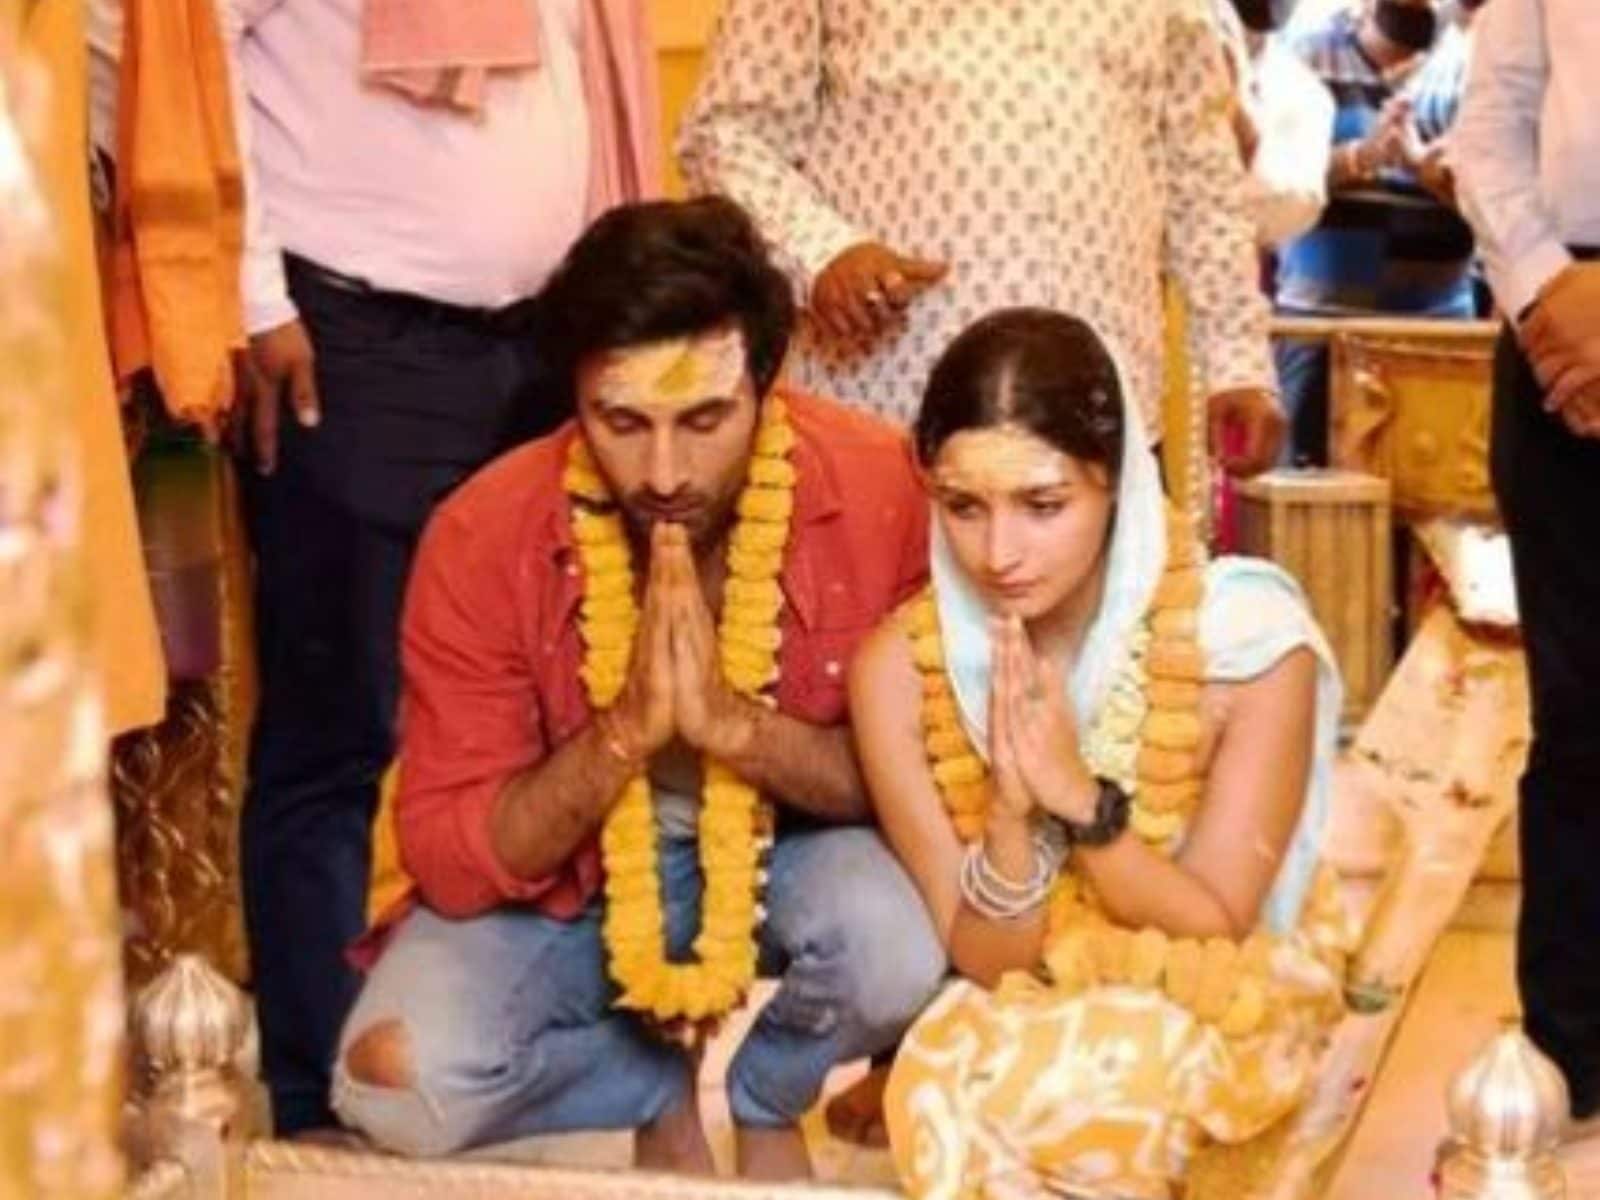 Ranbir Kapoor to Accompany Alia Bhatt to Switzerland for Shoot After their April Marriage at RK Studios?